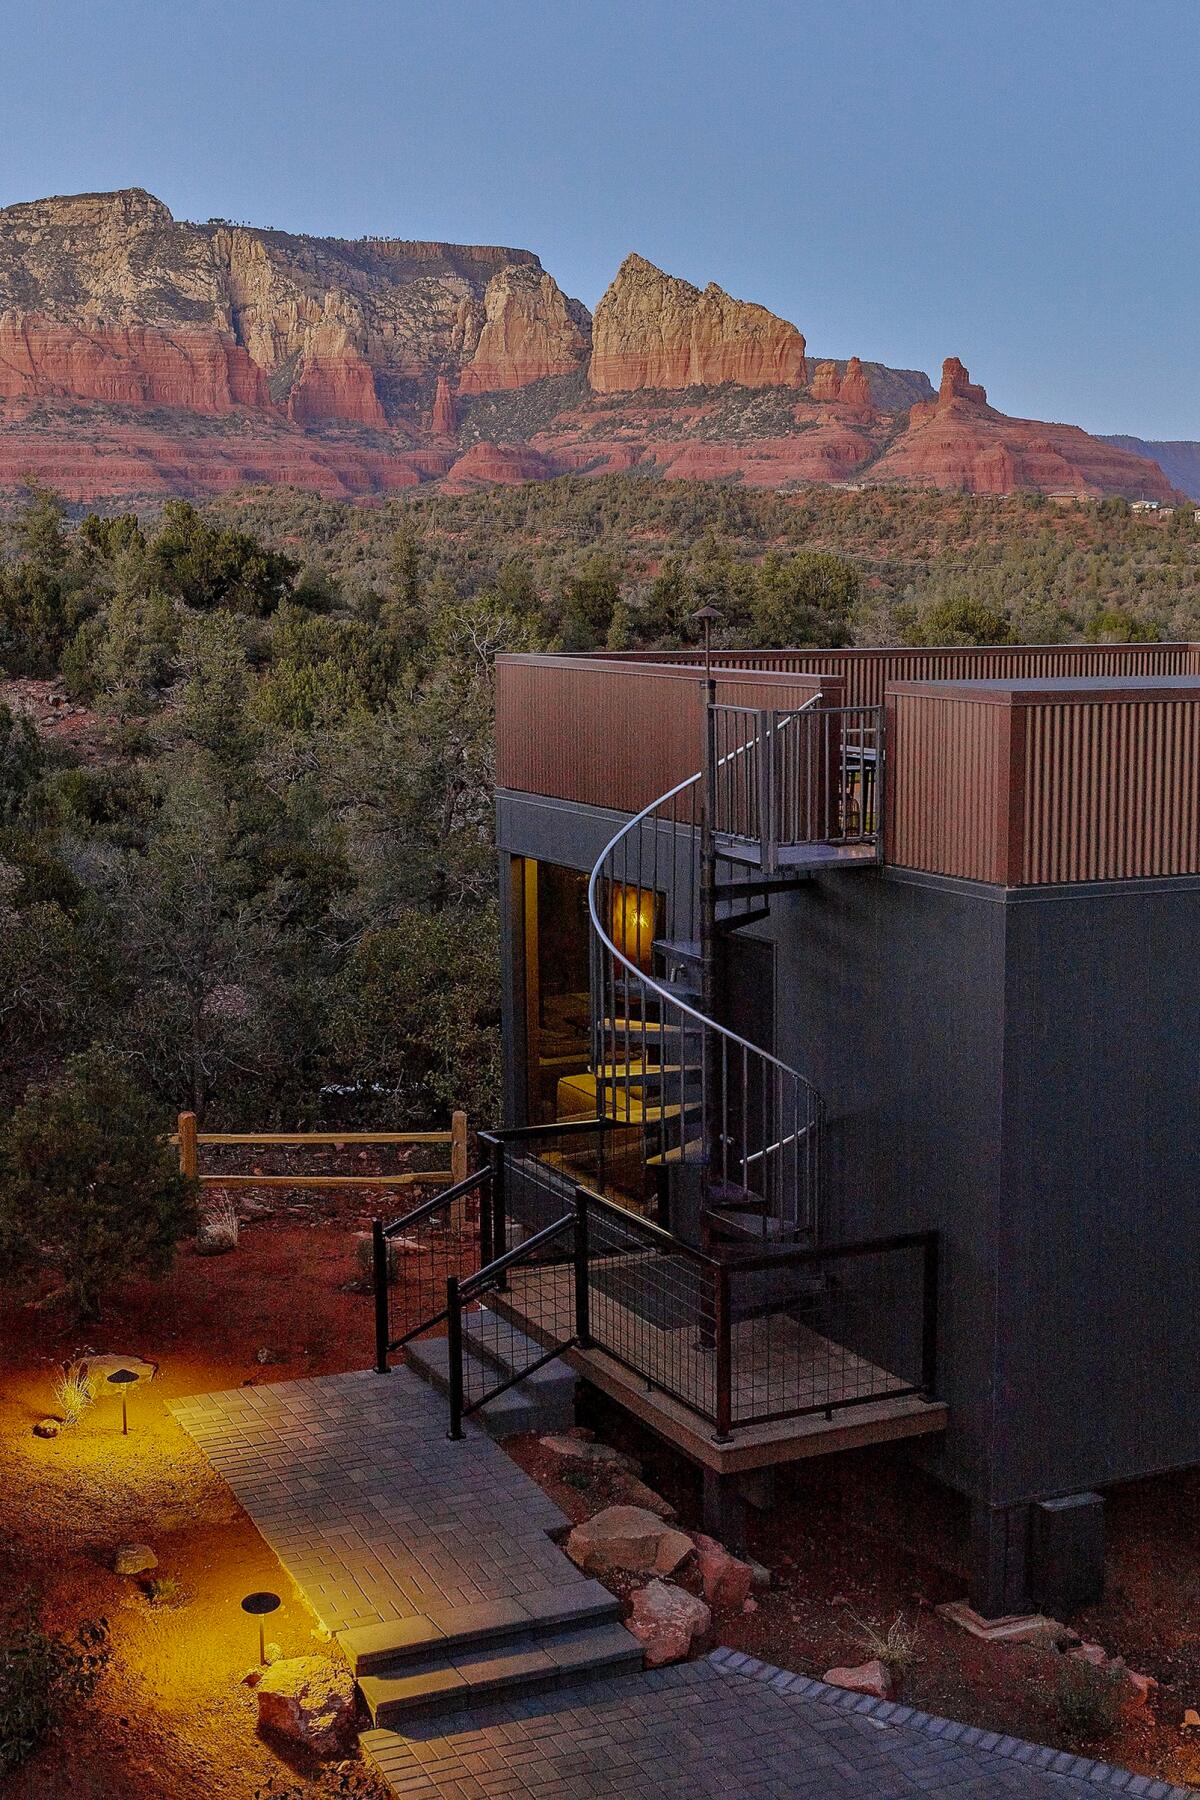 A building with a spiral staircase to its roof, against a backdrop of red rock mountains